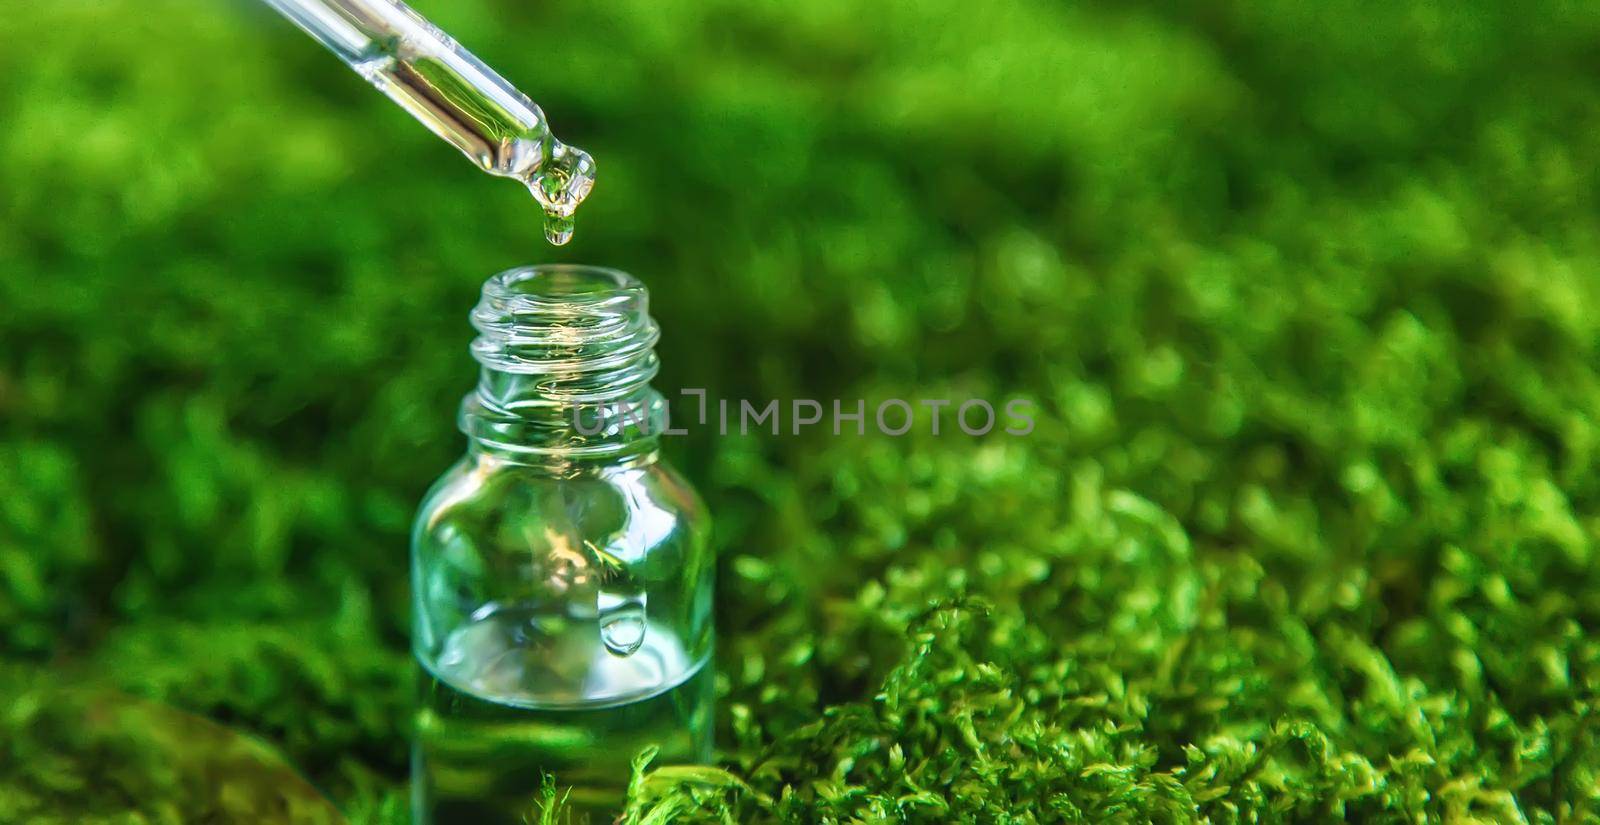 Cosmetics in a bottle and essential oils on moss. Natural spa. Selective focus. Nature.